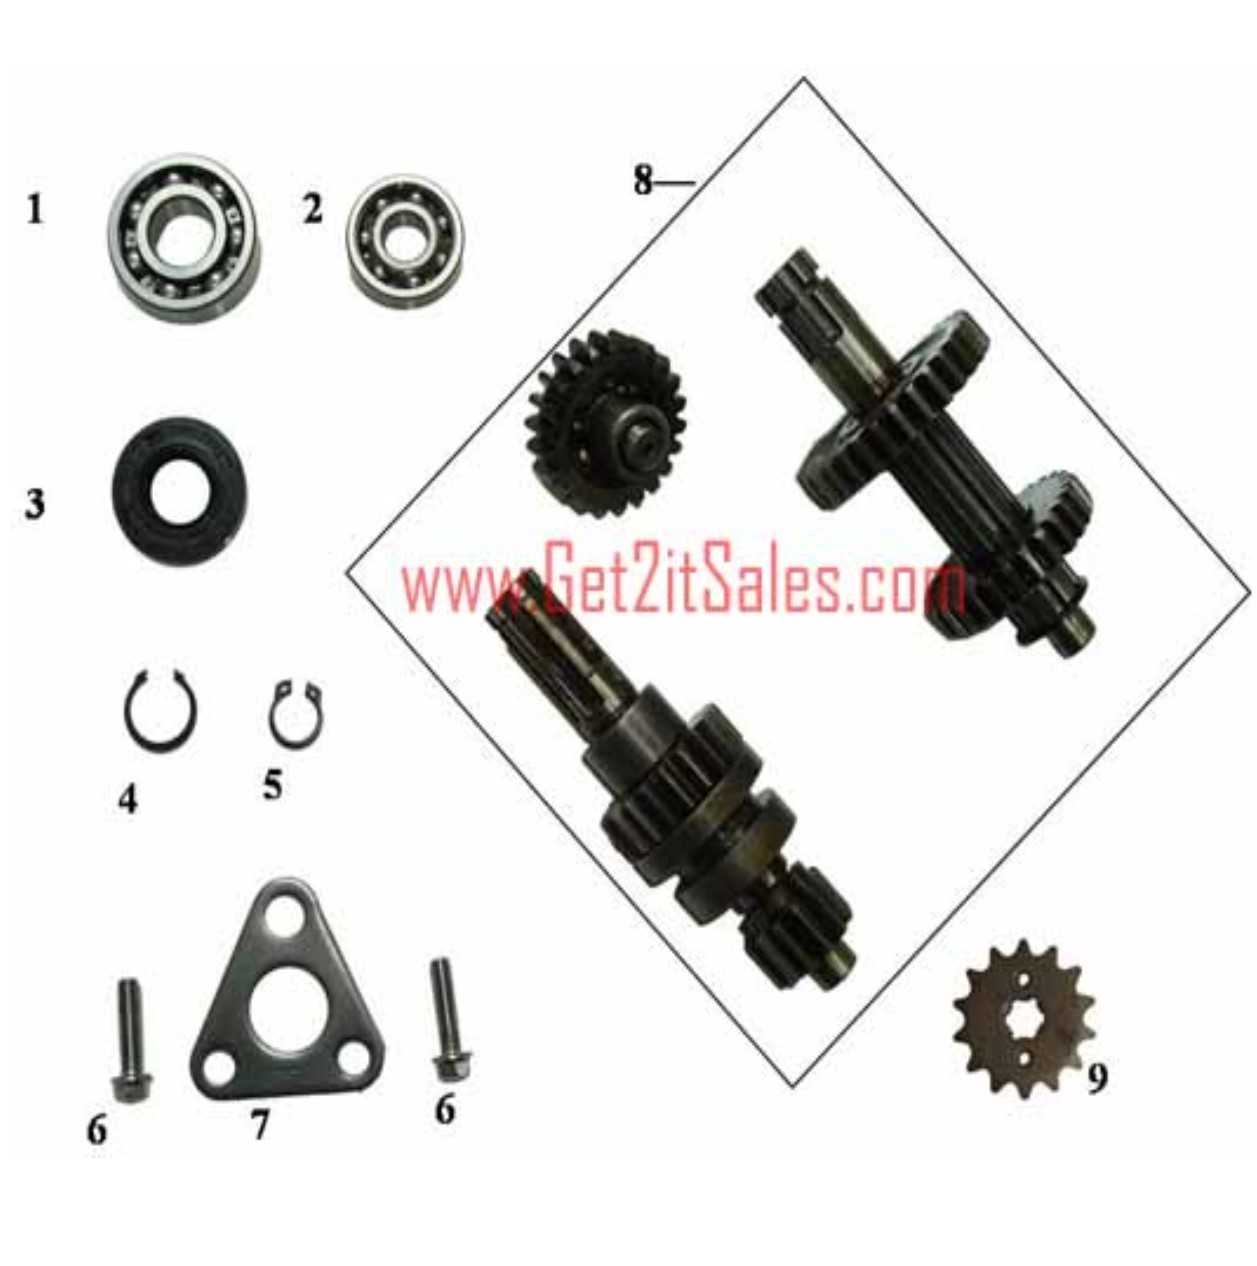 Transmission Gears (Automatic with Reverse) 70cc ATV-Dirtbikes